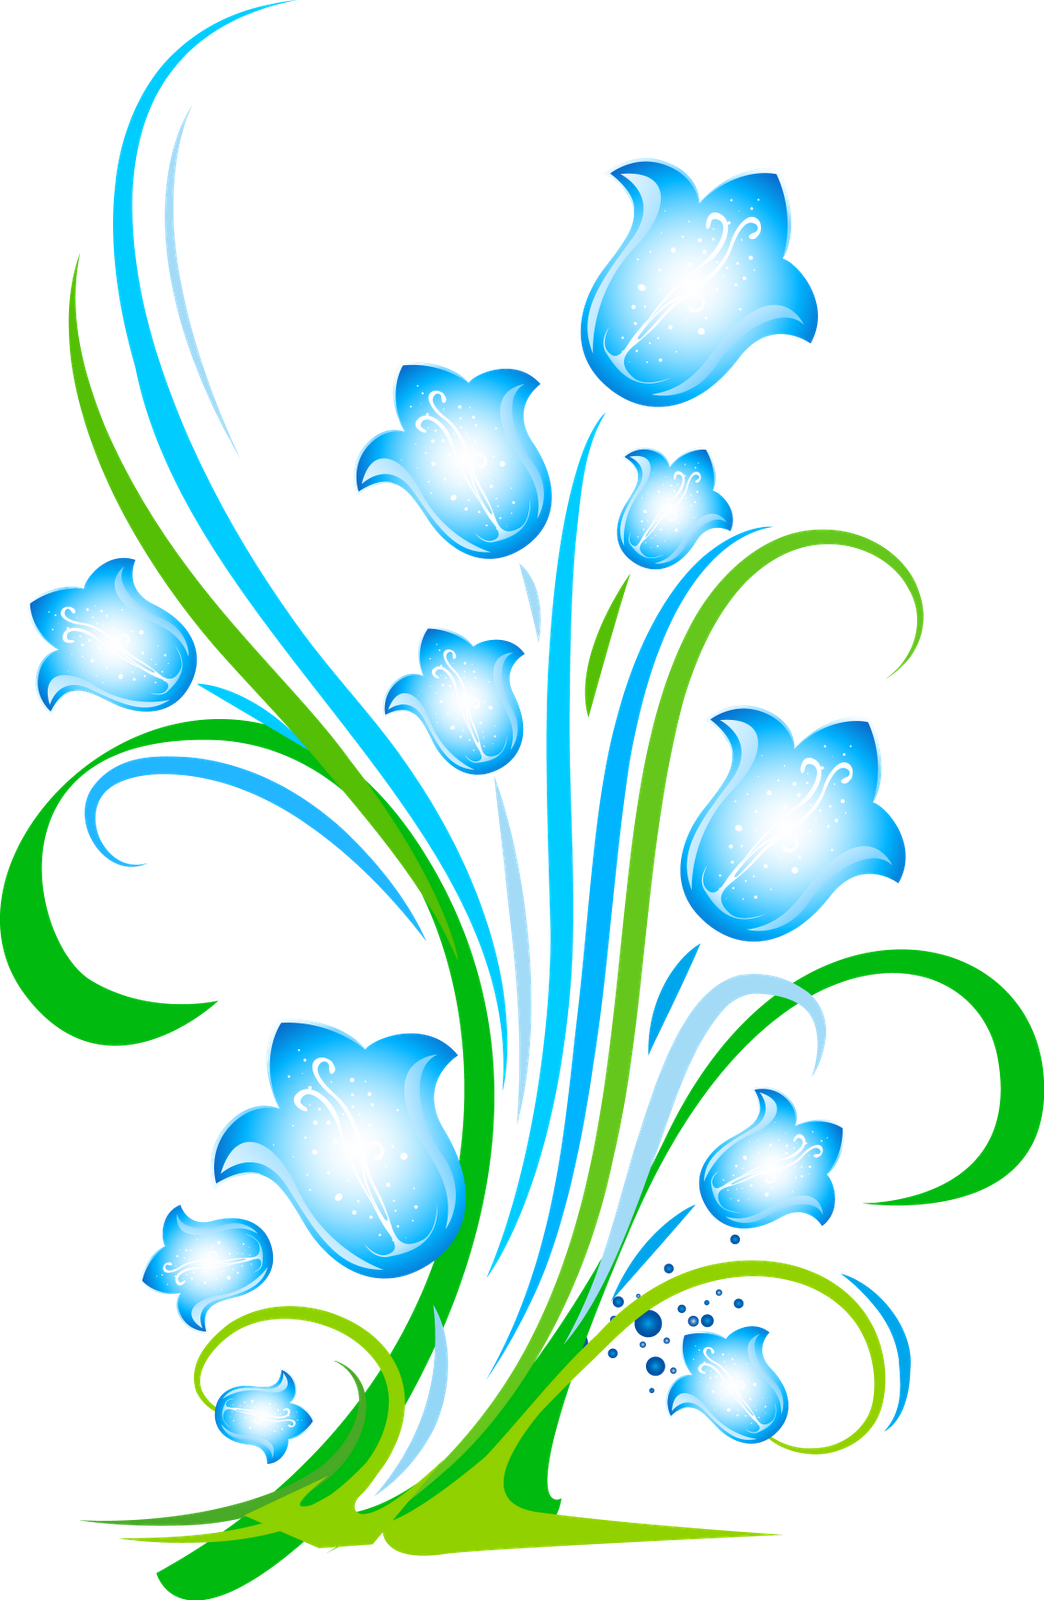 Floral Swirl Download Free Image PNG Image